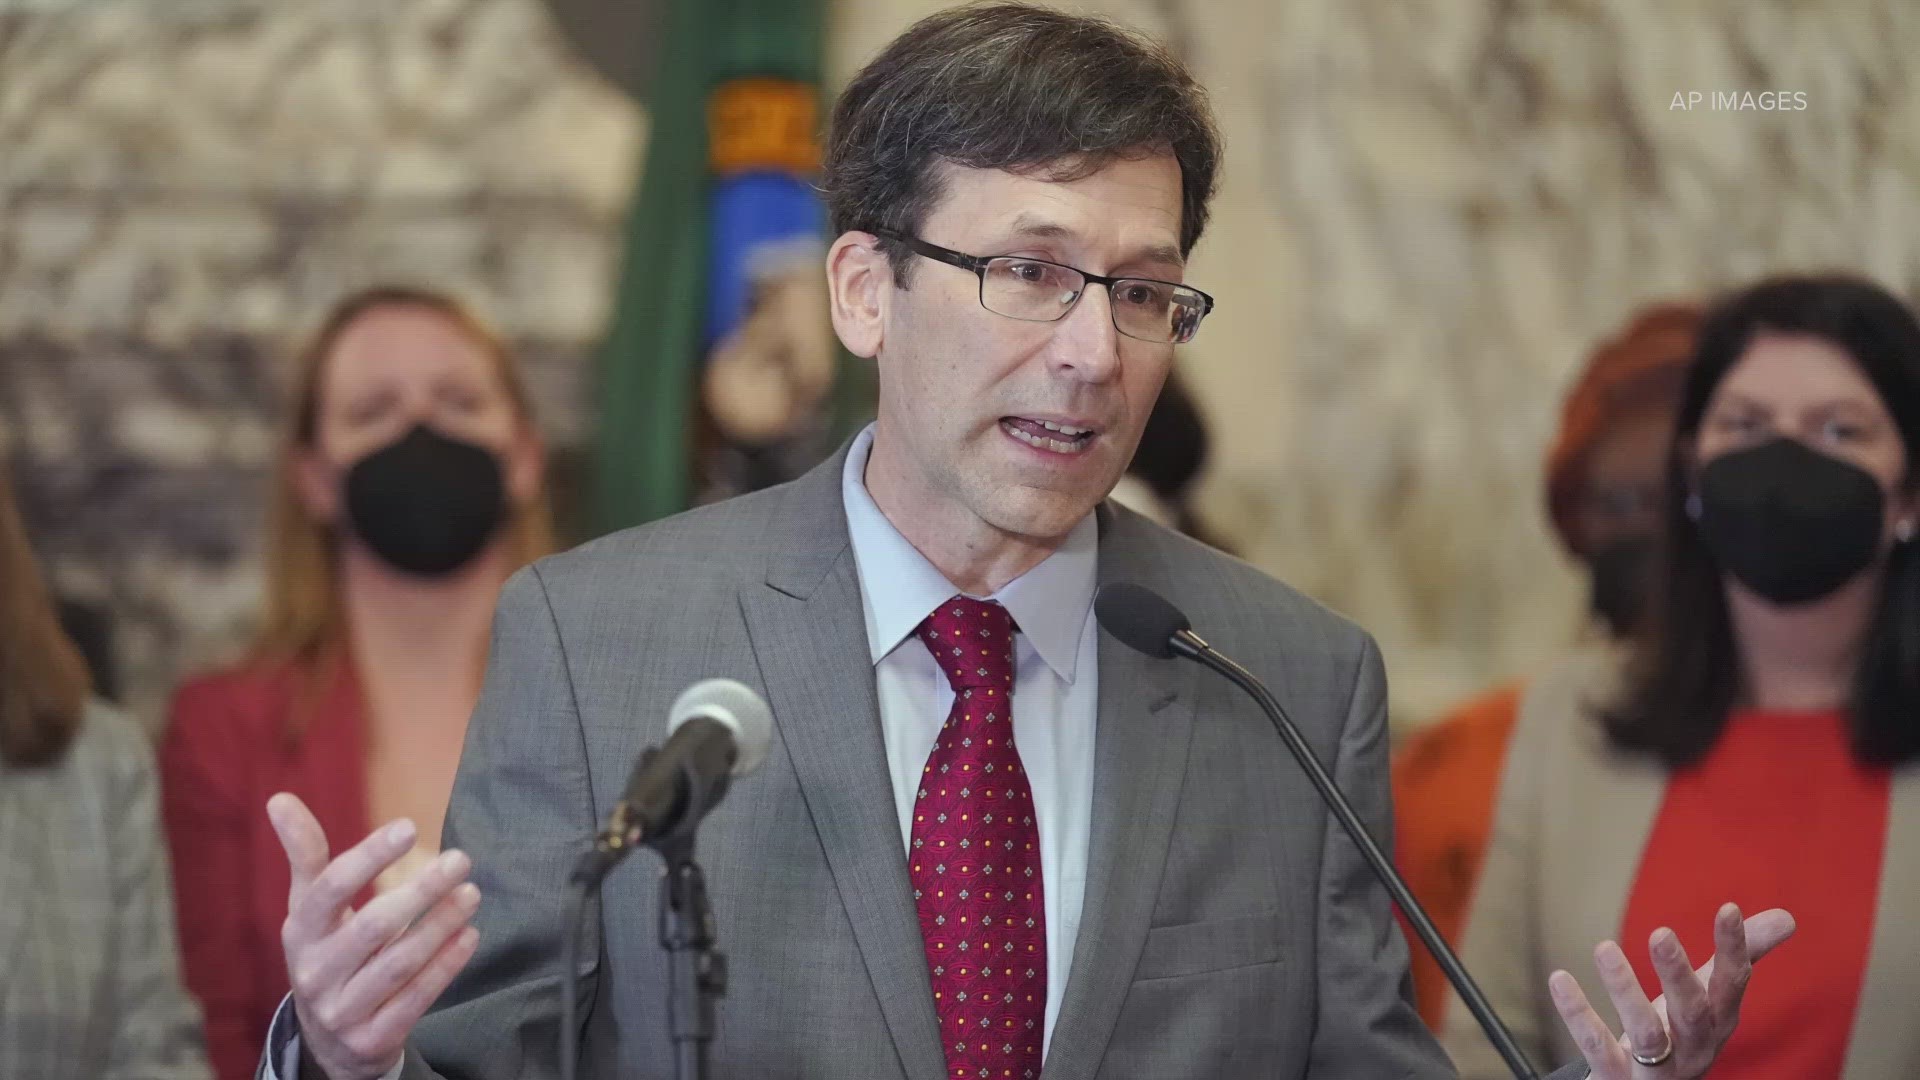 Ferguson is one of 20 attorneys general from around the country challenging the Idaho law.